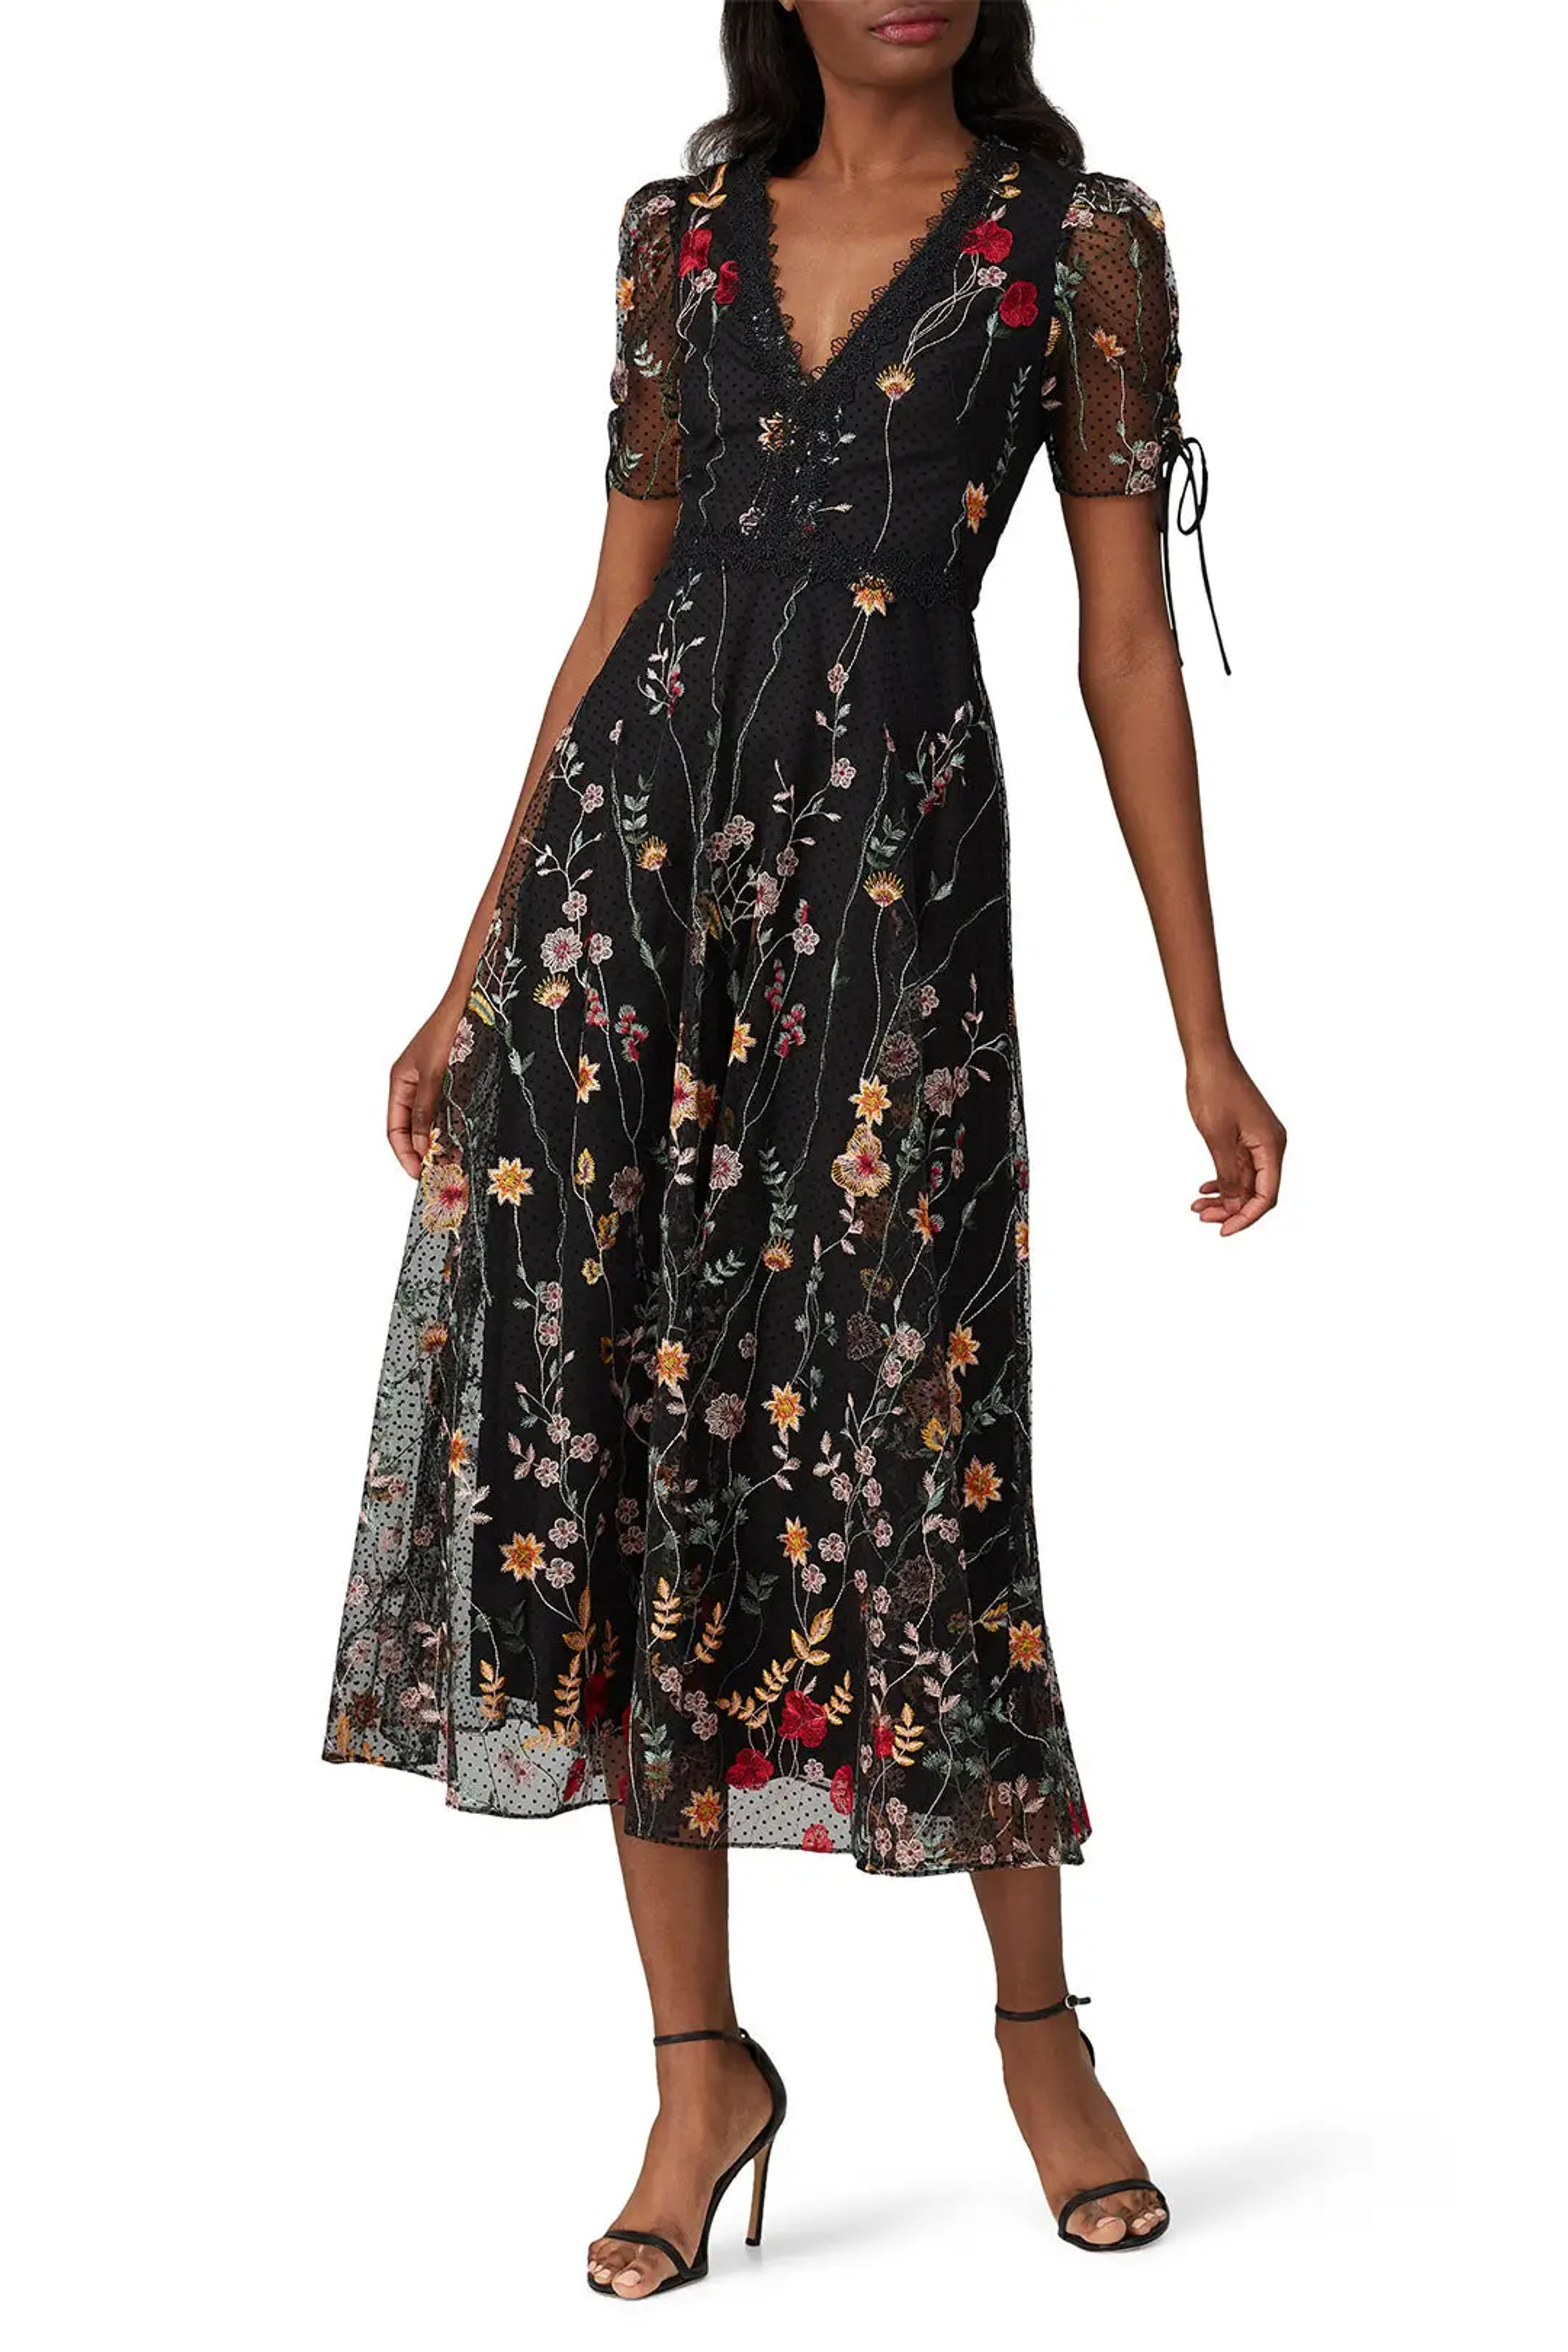 Floral Embroidered Mesh Dress by ML Monique Lhuillier for $81 - $106 | Rent the Runway